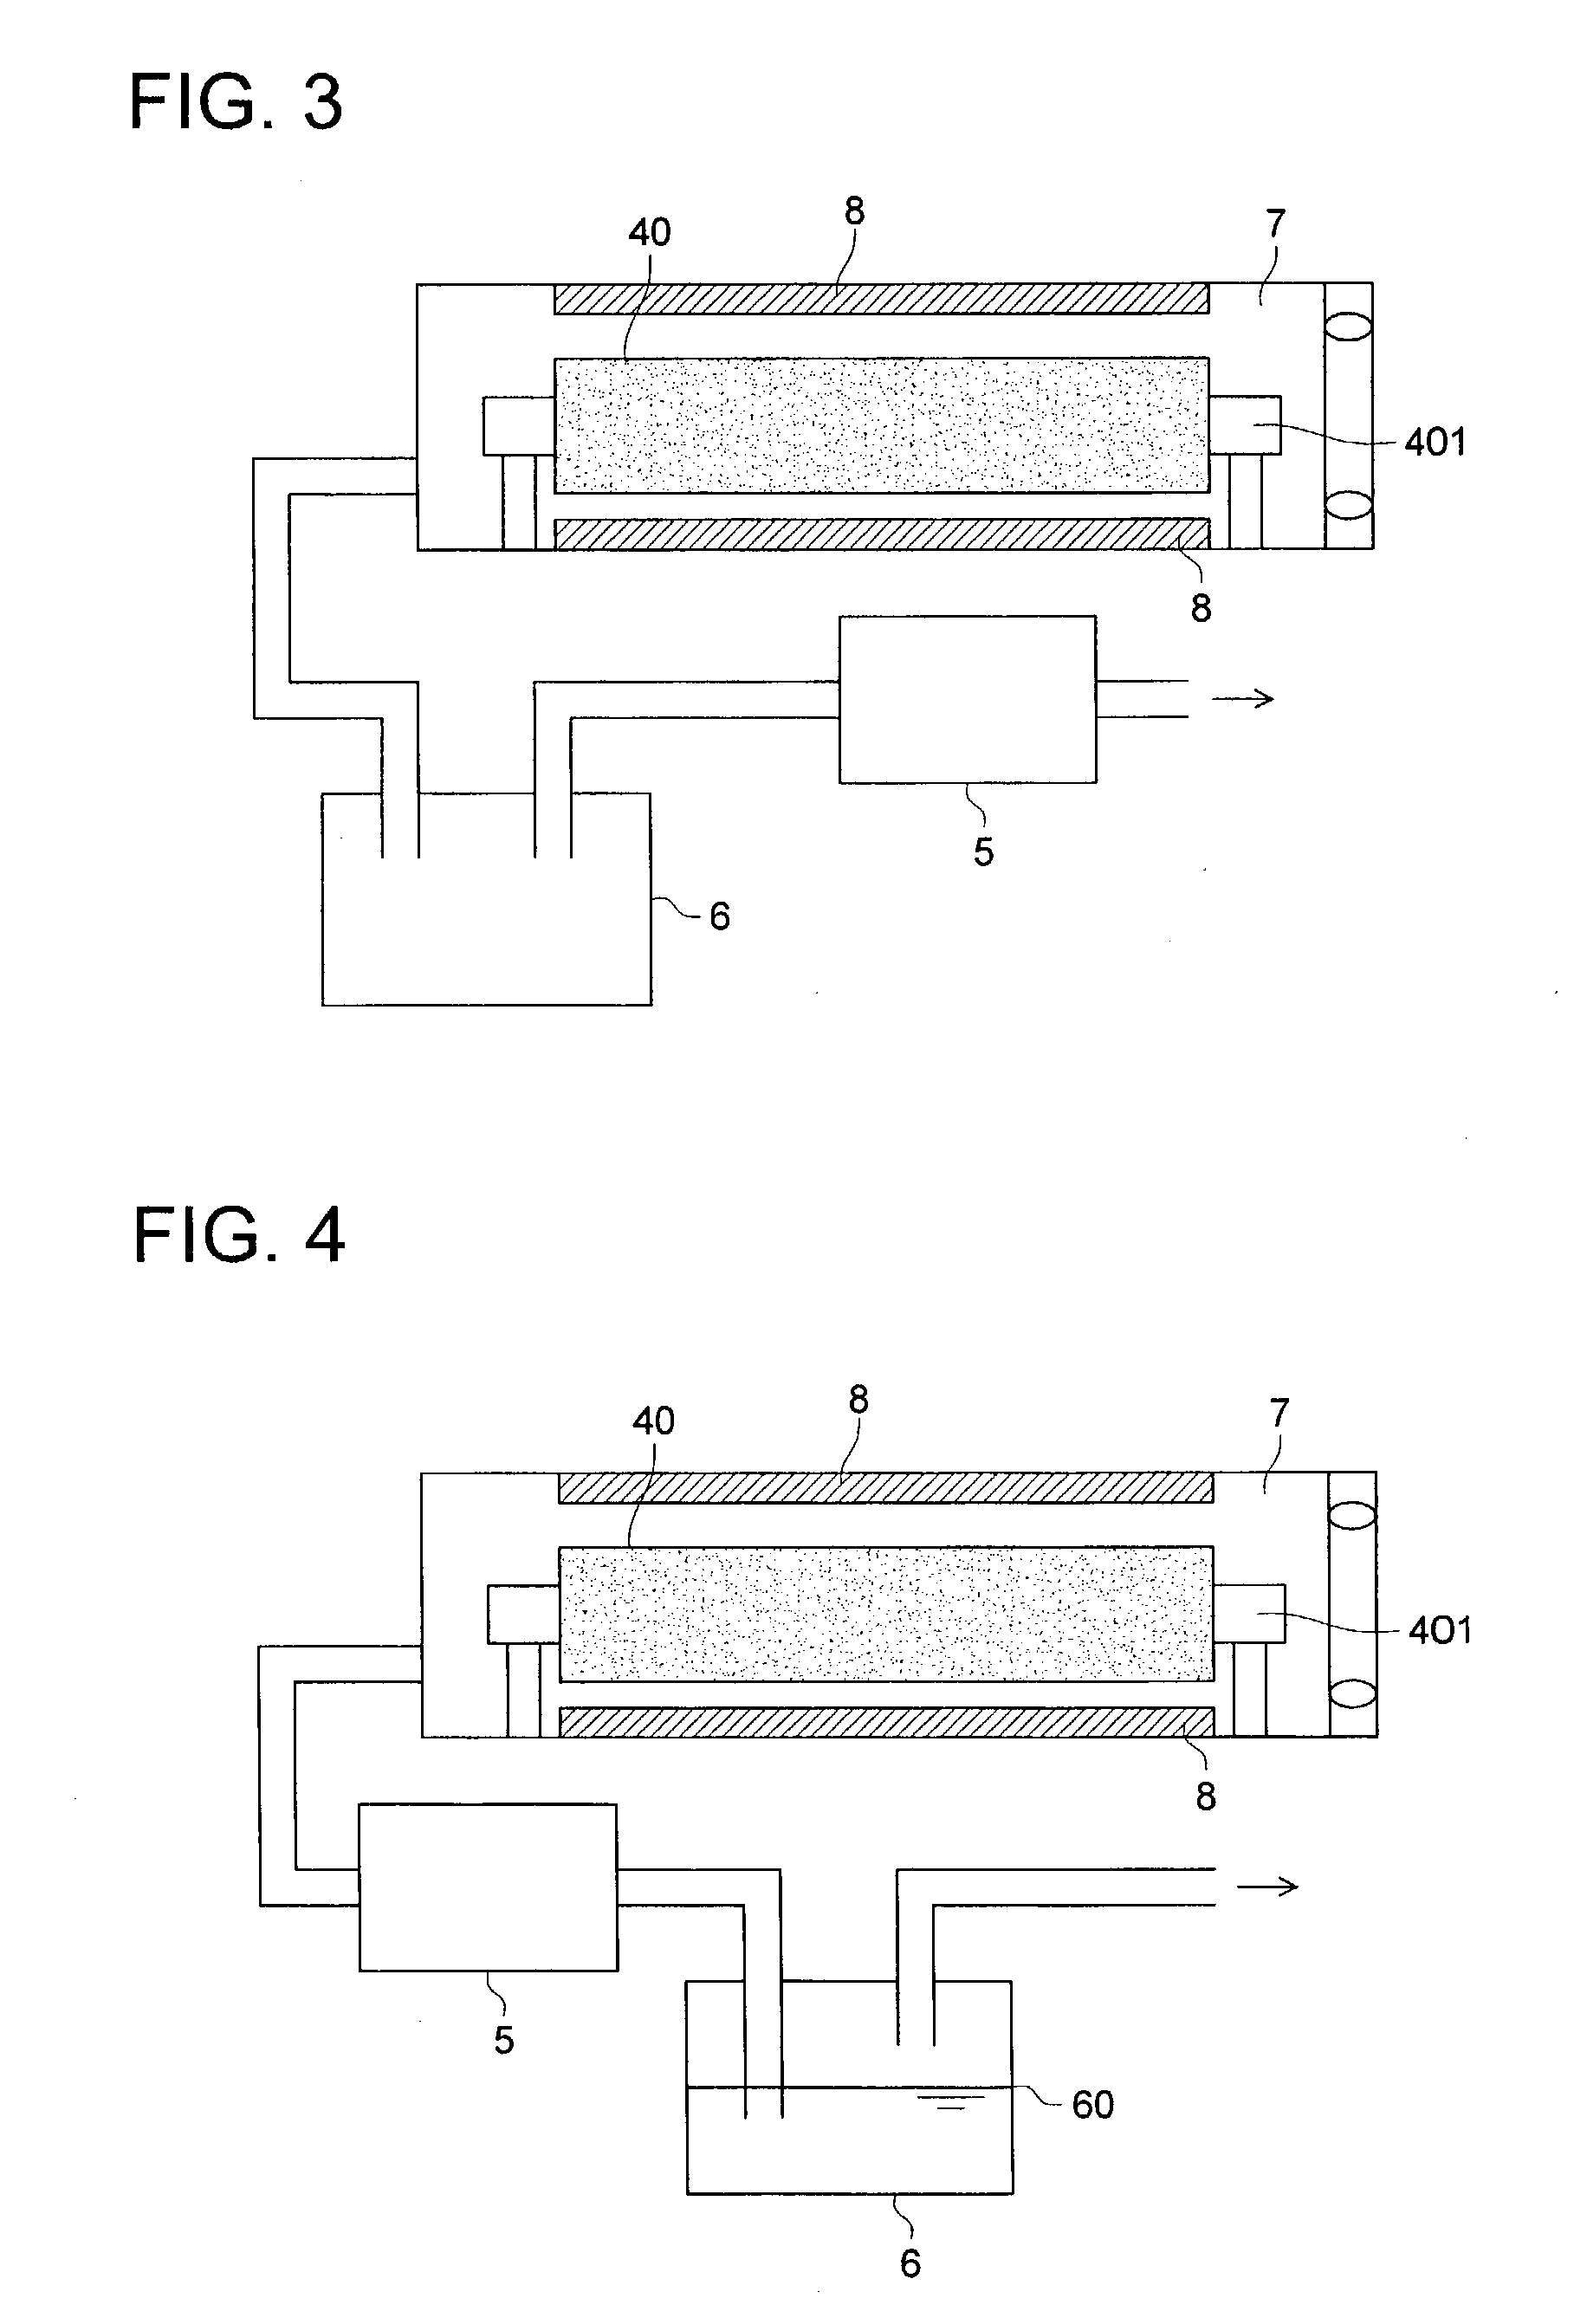 Image forming method and image forming system